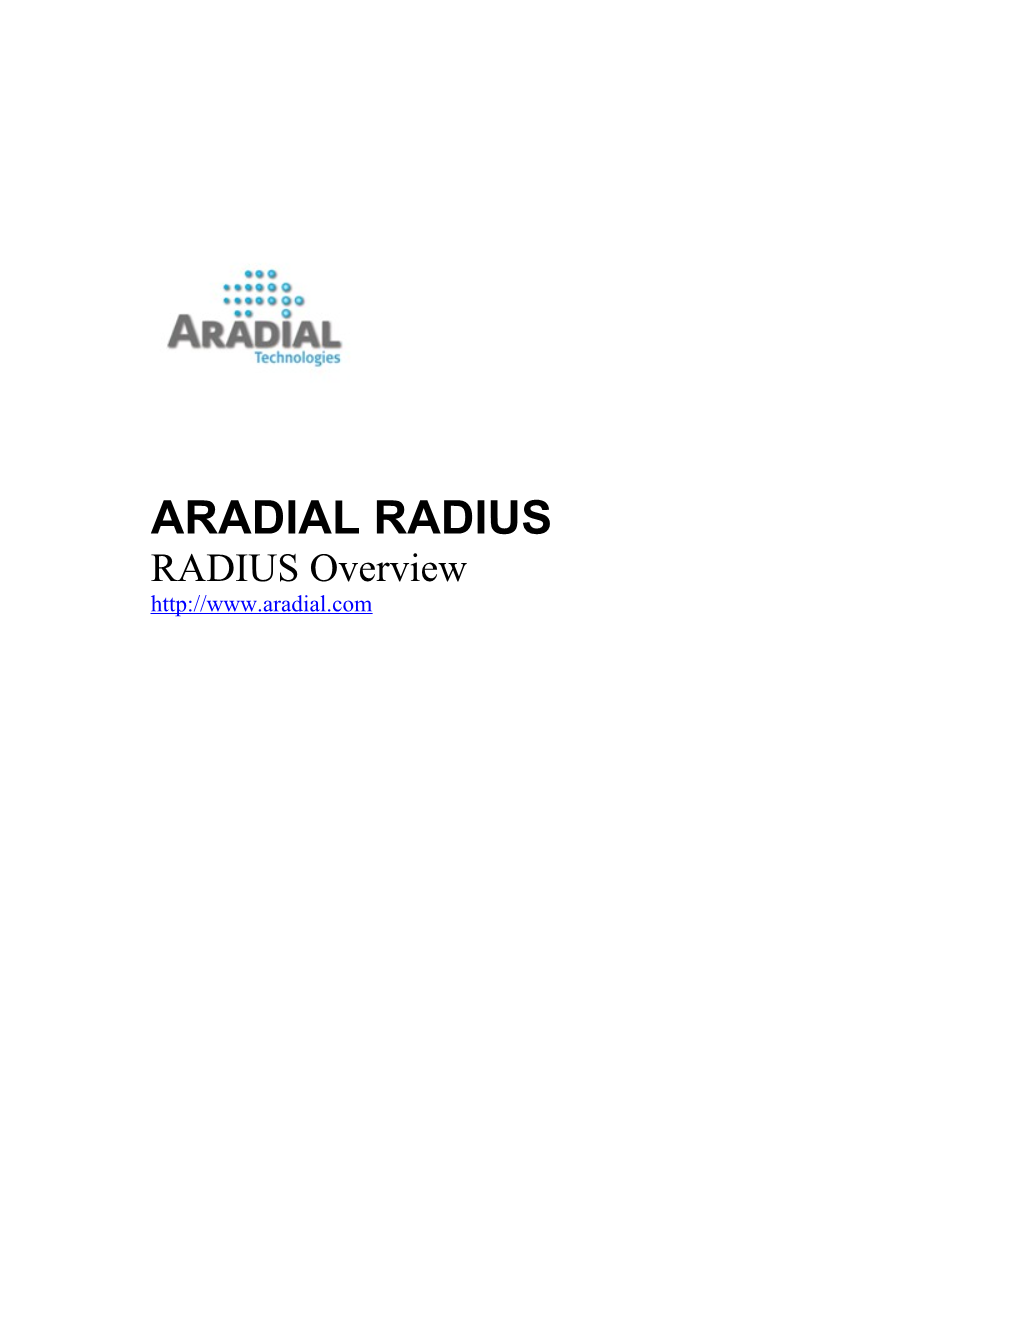 ARADIAL Radiusproduct Overview